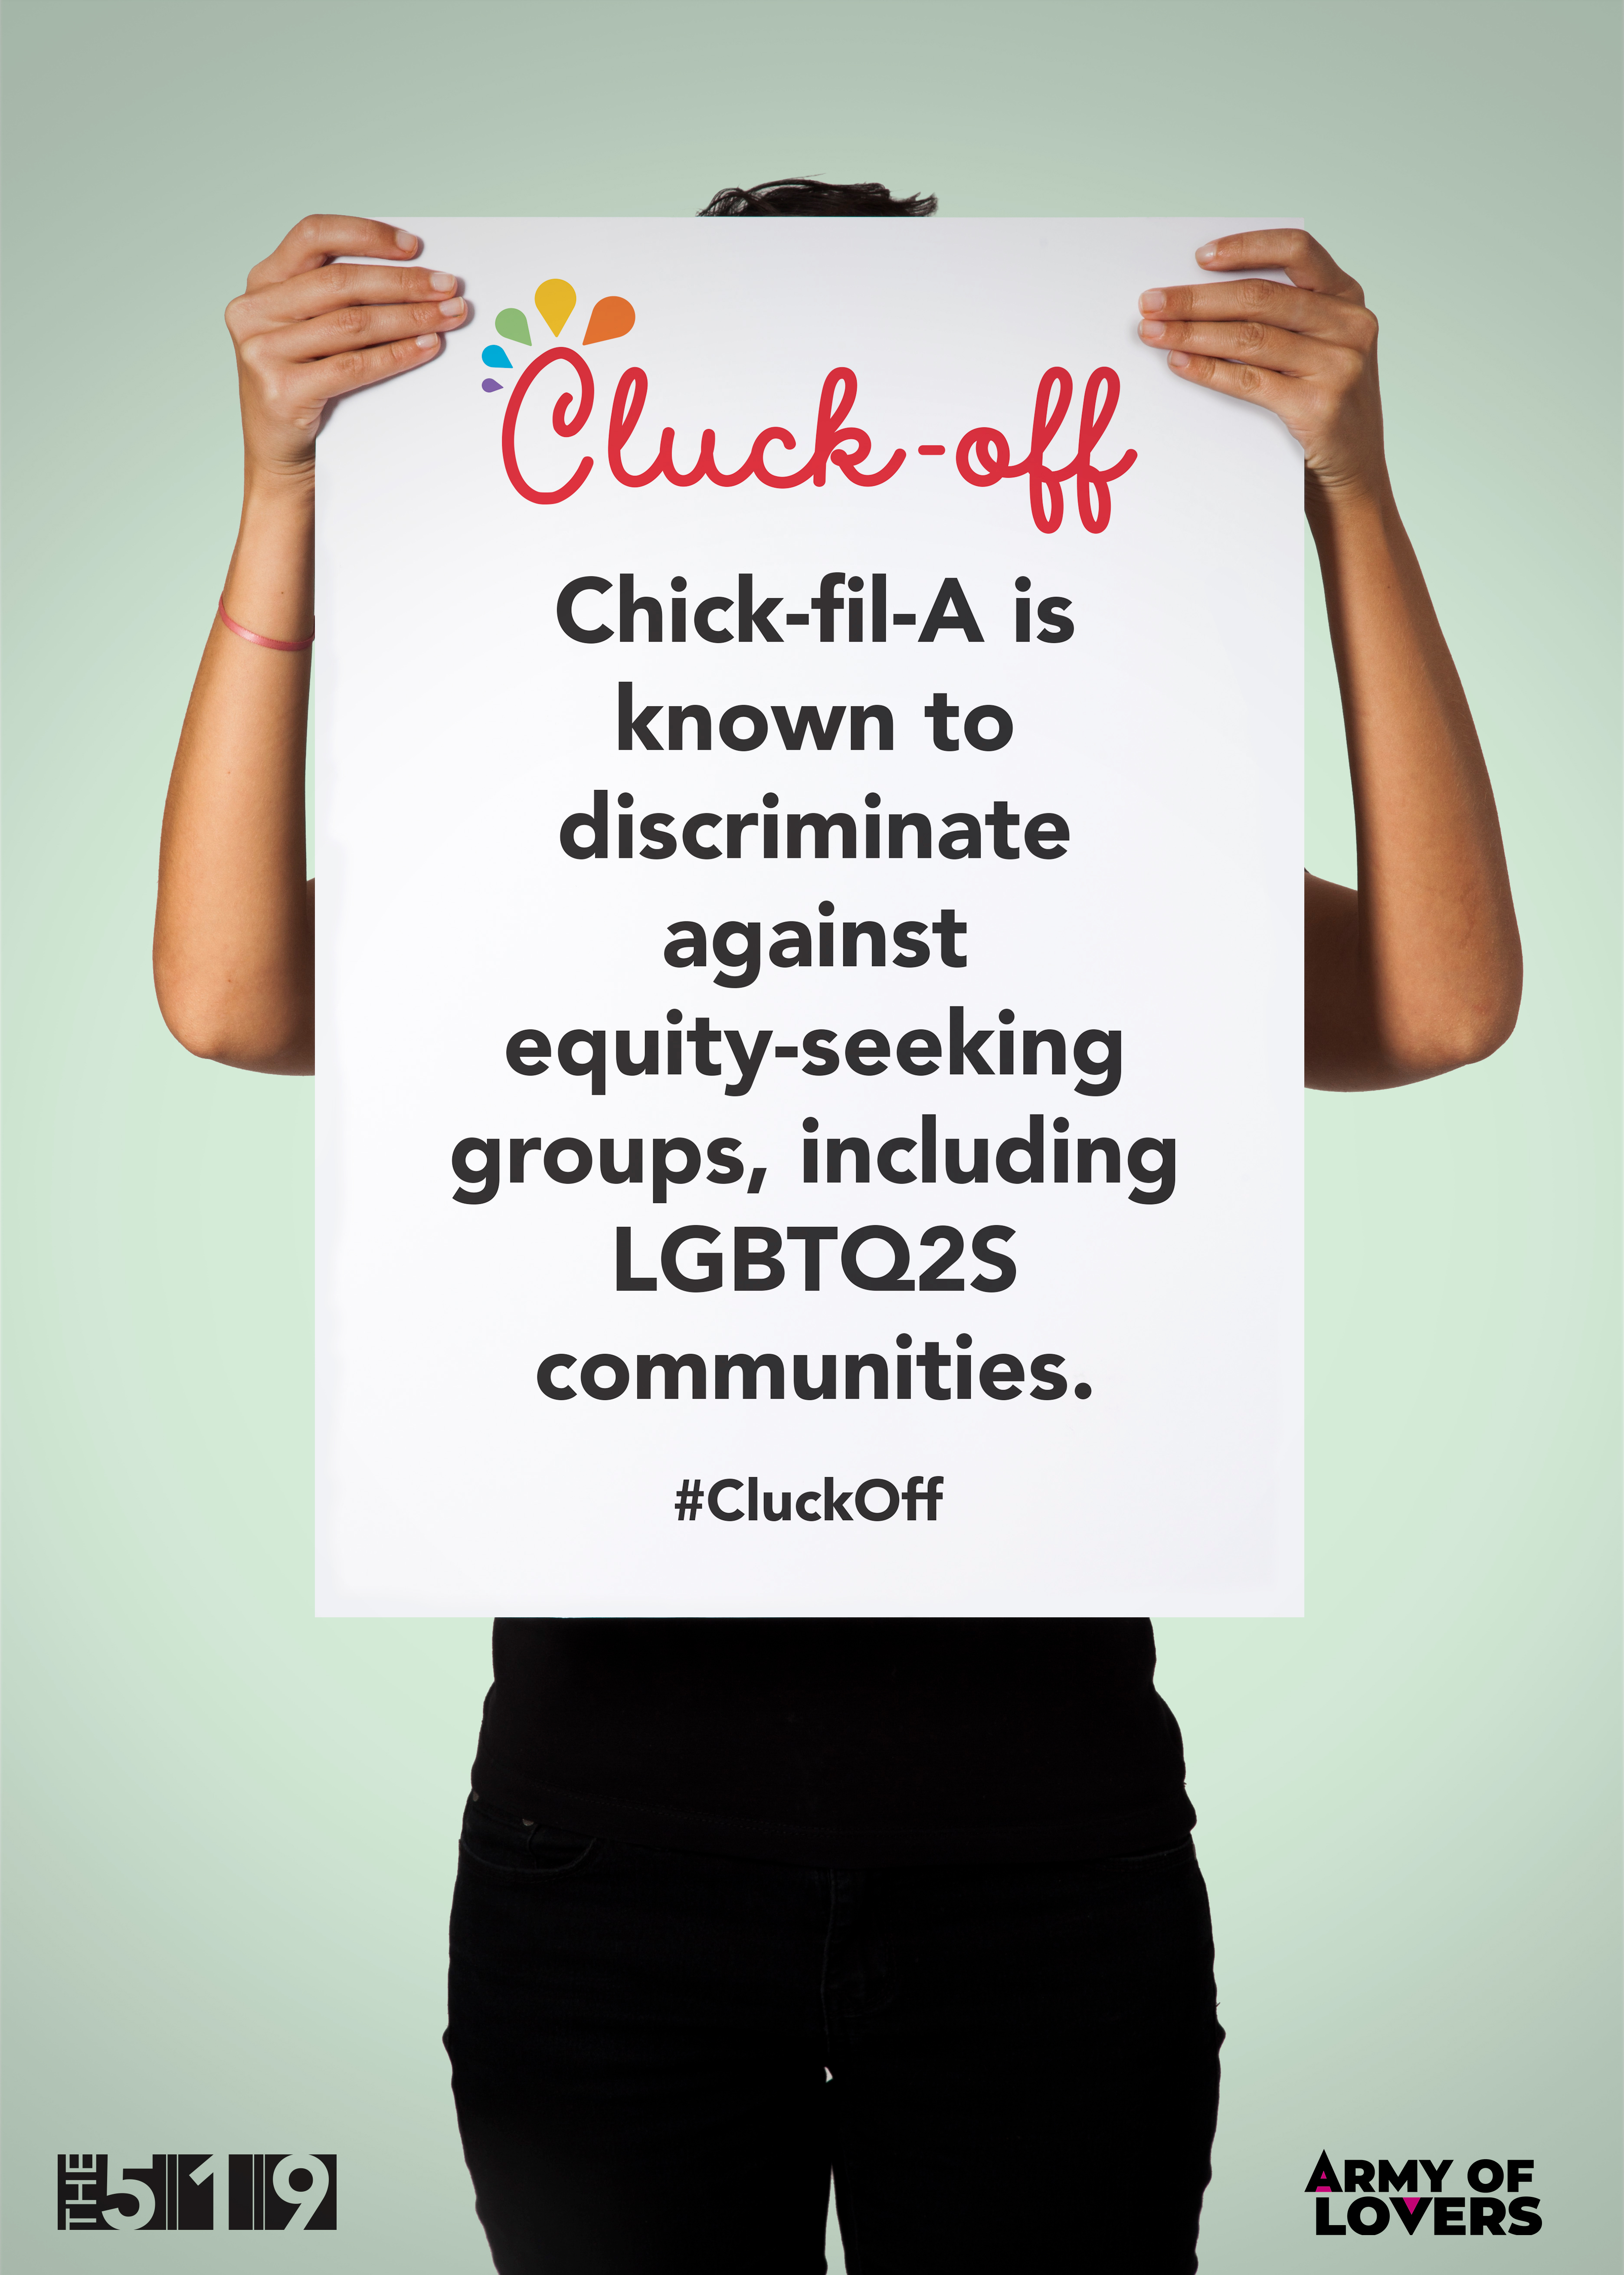 Individual holding a white posters that reads "Cluck-off" in red similar to Chick-fil-A's branding. It has text "Chick-fil-A is known to discriminate against equity-seeking groups, including LGBTQ2S communities." #CluckOff